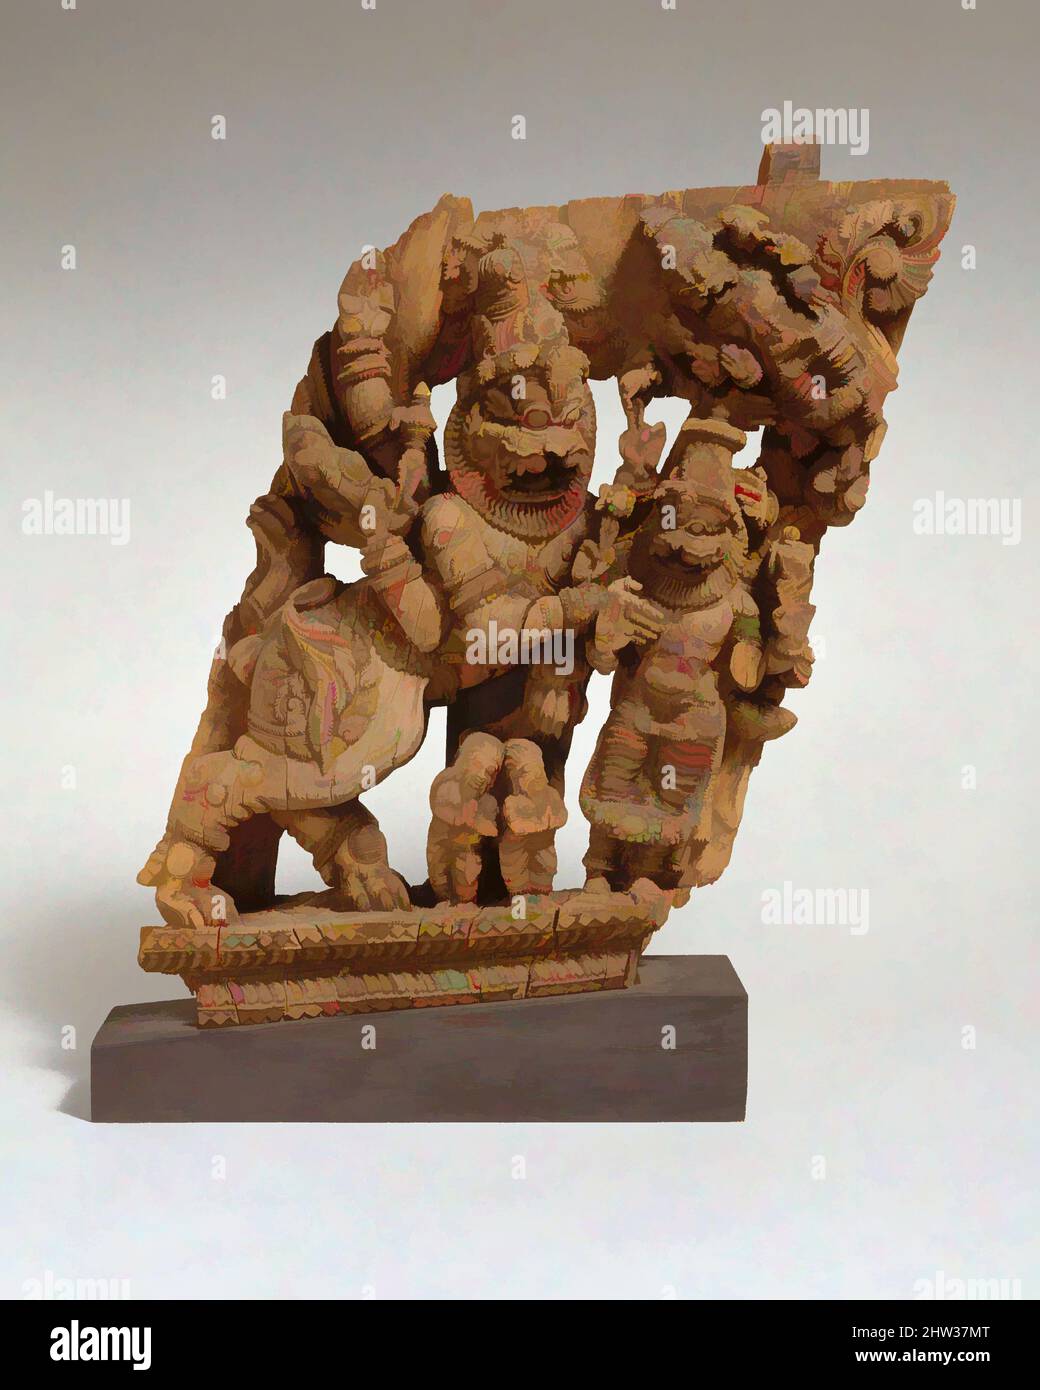 Art inspired by Panel from a Ritual Chariot: Narasimha, the Man-Lion Incarnation of Vishnu, 17th–18th century, India (Tamil Nadu), Wood, H. 23 1/2 in. (59.7 cm); W. 24 in. (61 cm), Sculpture, Classic works modernized by Artotop with a splash of modernity. Shapes, color and value, eye-catching visual impact on art. Emotions through freedom of artworks in a contemporary way. A timeless message pursuing a wildly creative new direction. Artists turning to the digital medium and creating the Artotop NFT Stock Photo